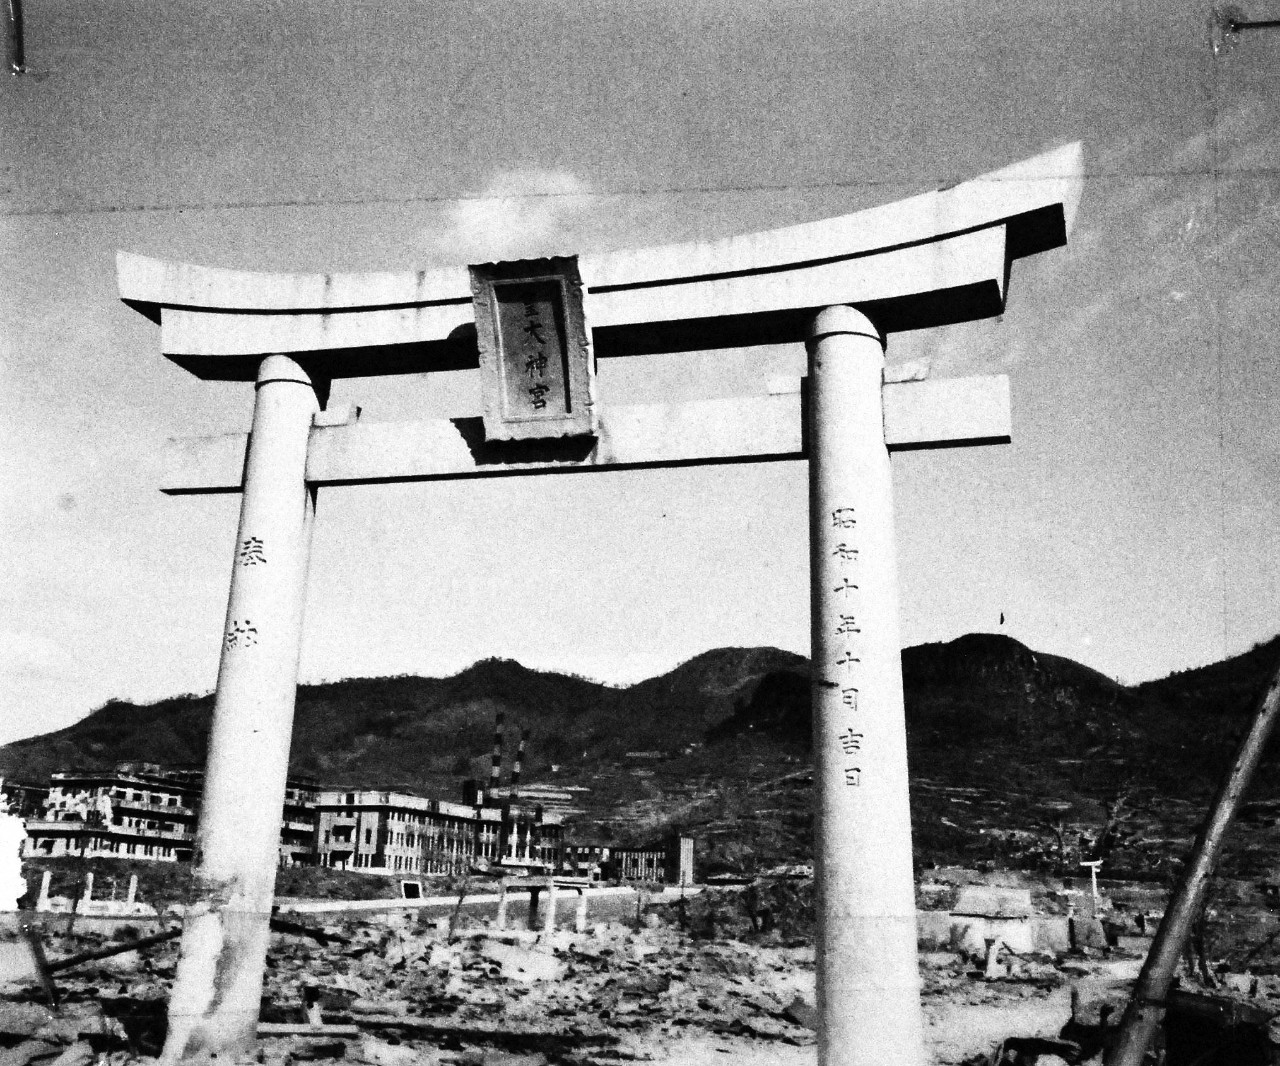 127-GW-1643-137017:     Nagasaki, Japan, 1945.   All that is left of one Shinto shrine is the toril, or entrance arch.    Photographed by Lieutenant R. J. Battersby, October 1945.        Official U.S. Marine Corps Photograph, now in the collections of the National Archives.  (2016/10/25).